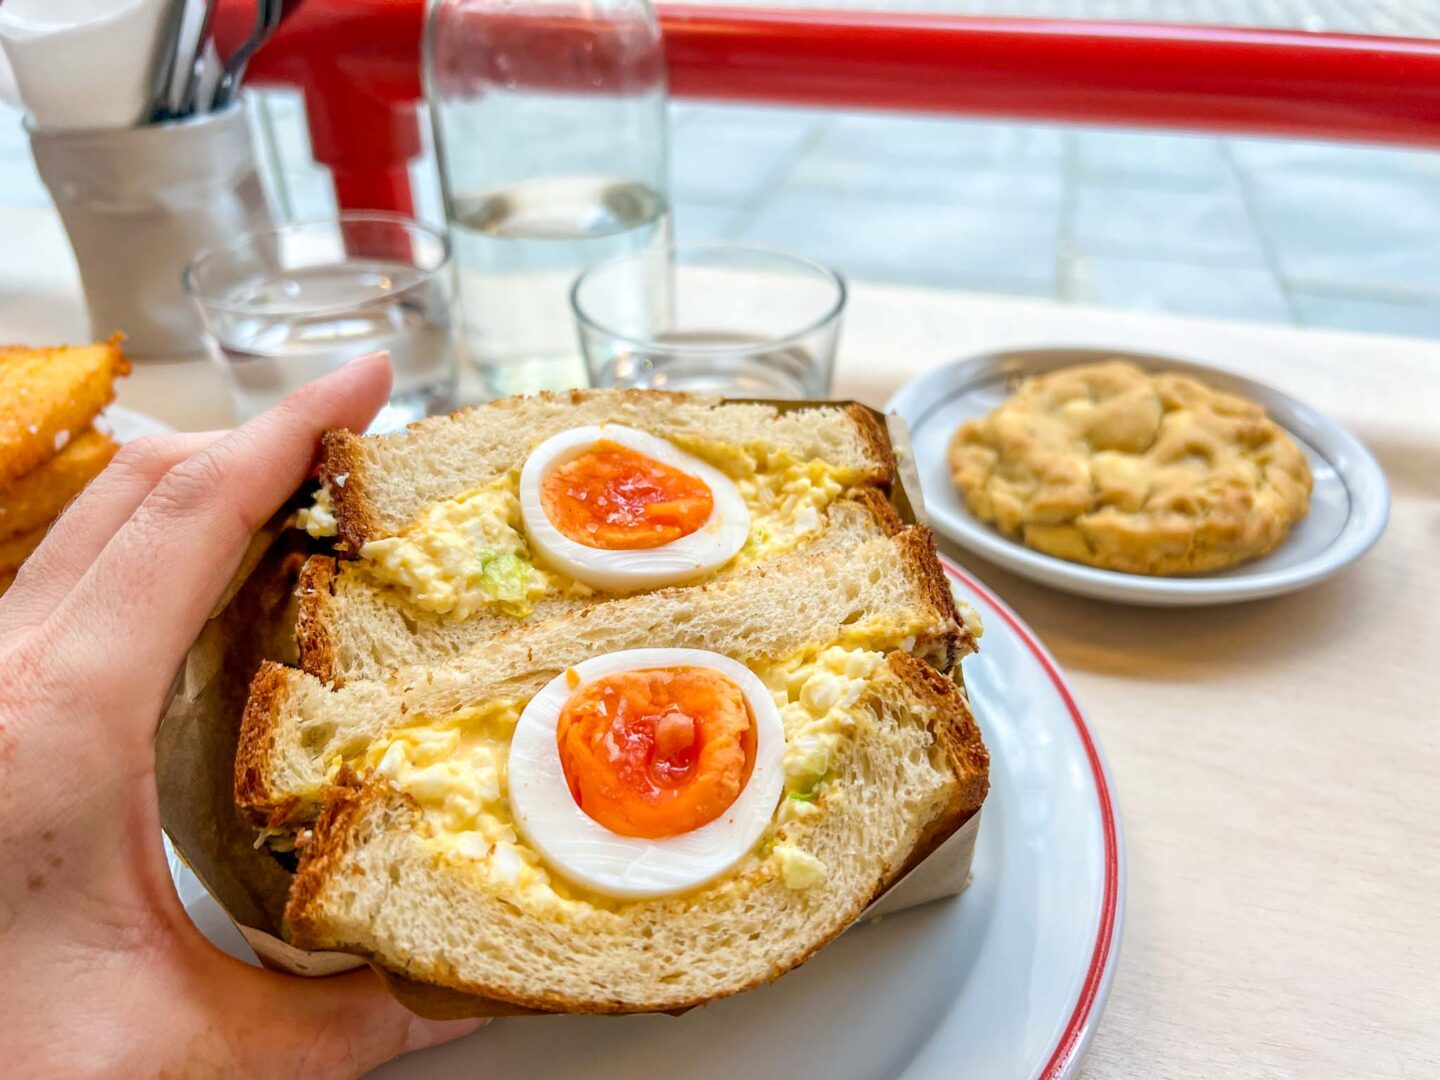 Egg Sandwich from Gooey Co, one day in Manchester,